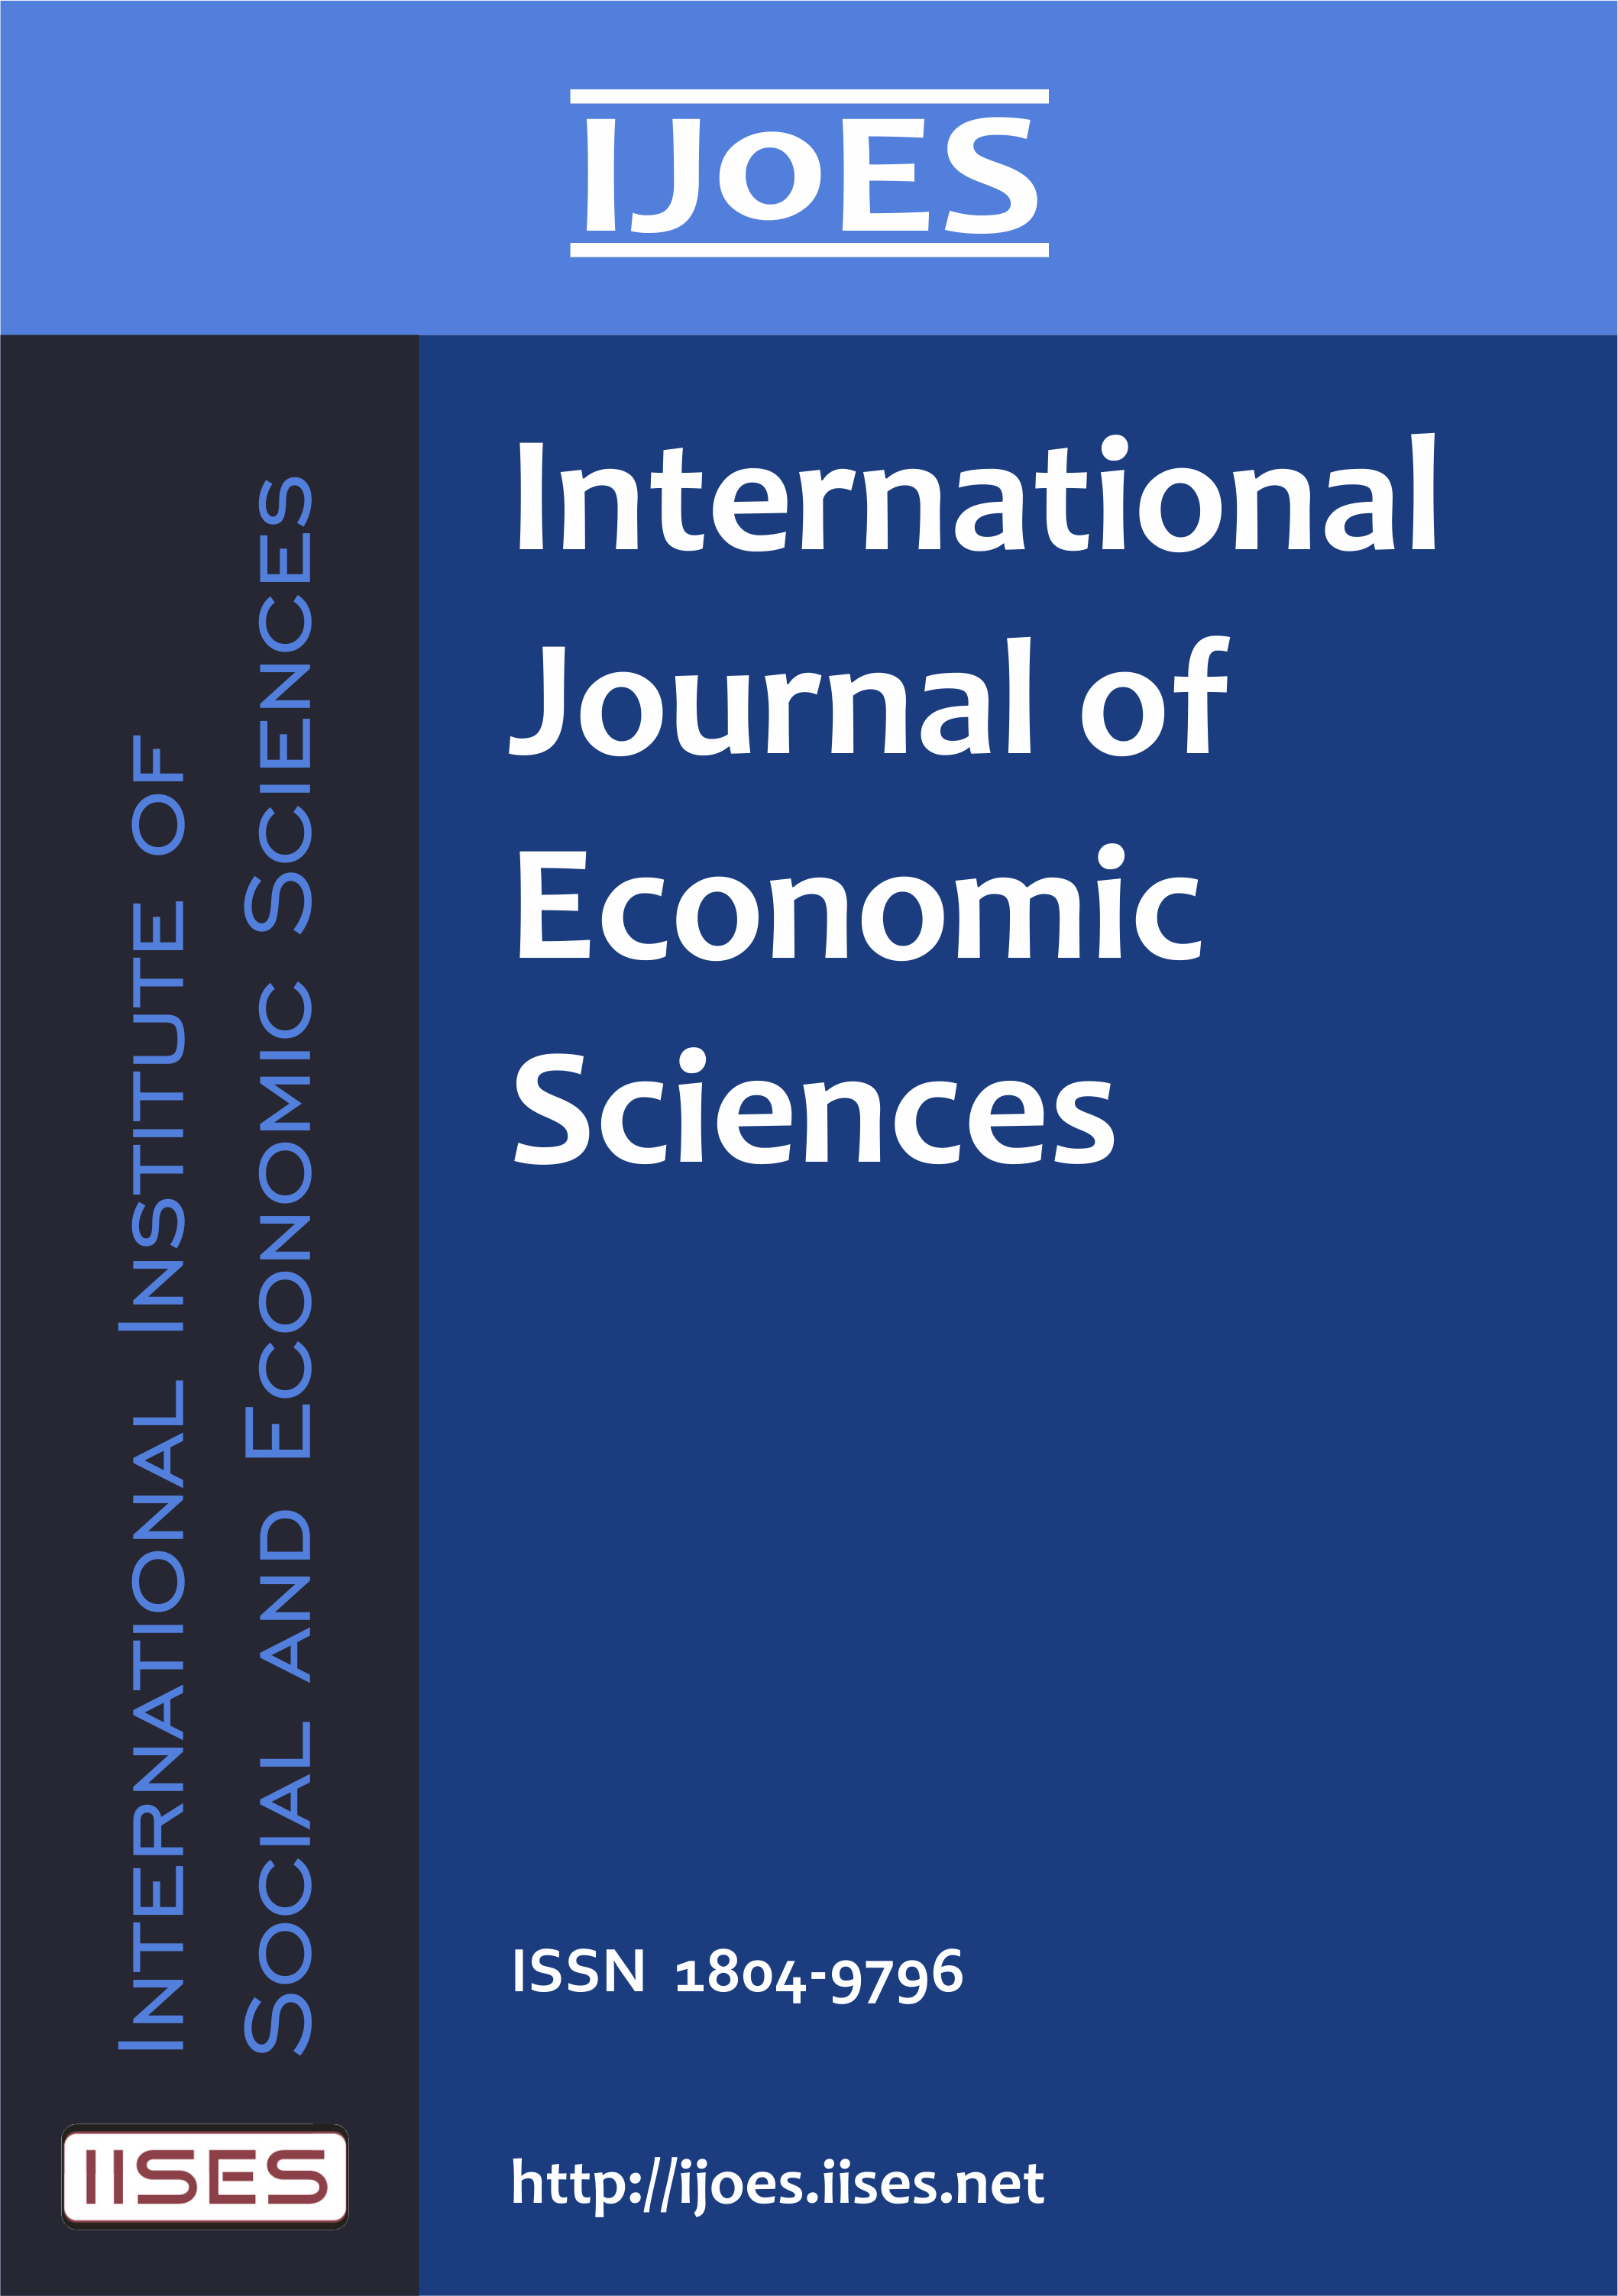 Dissertation abstracts international and social science periodical index